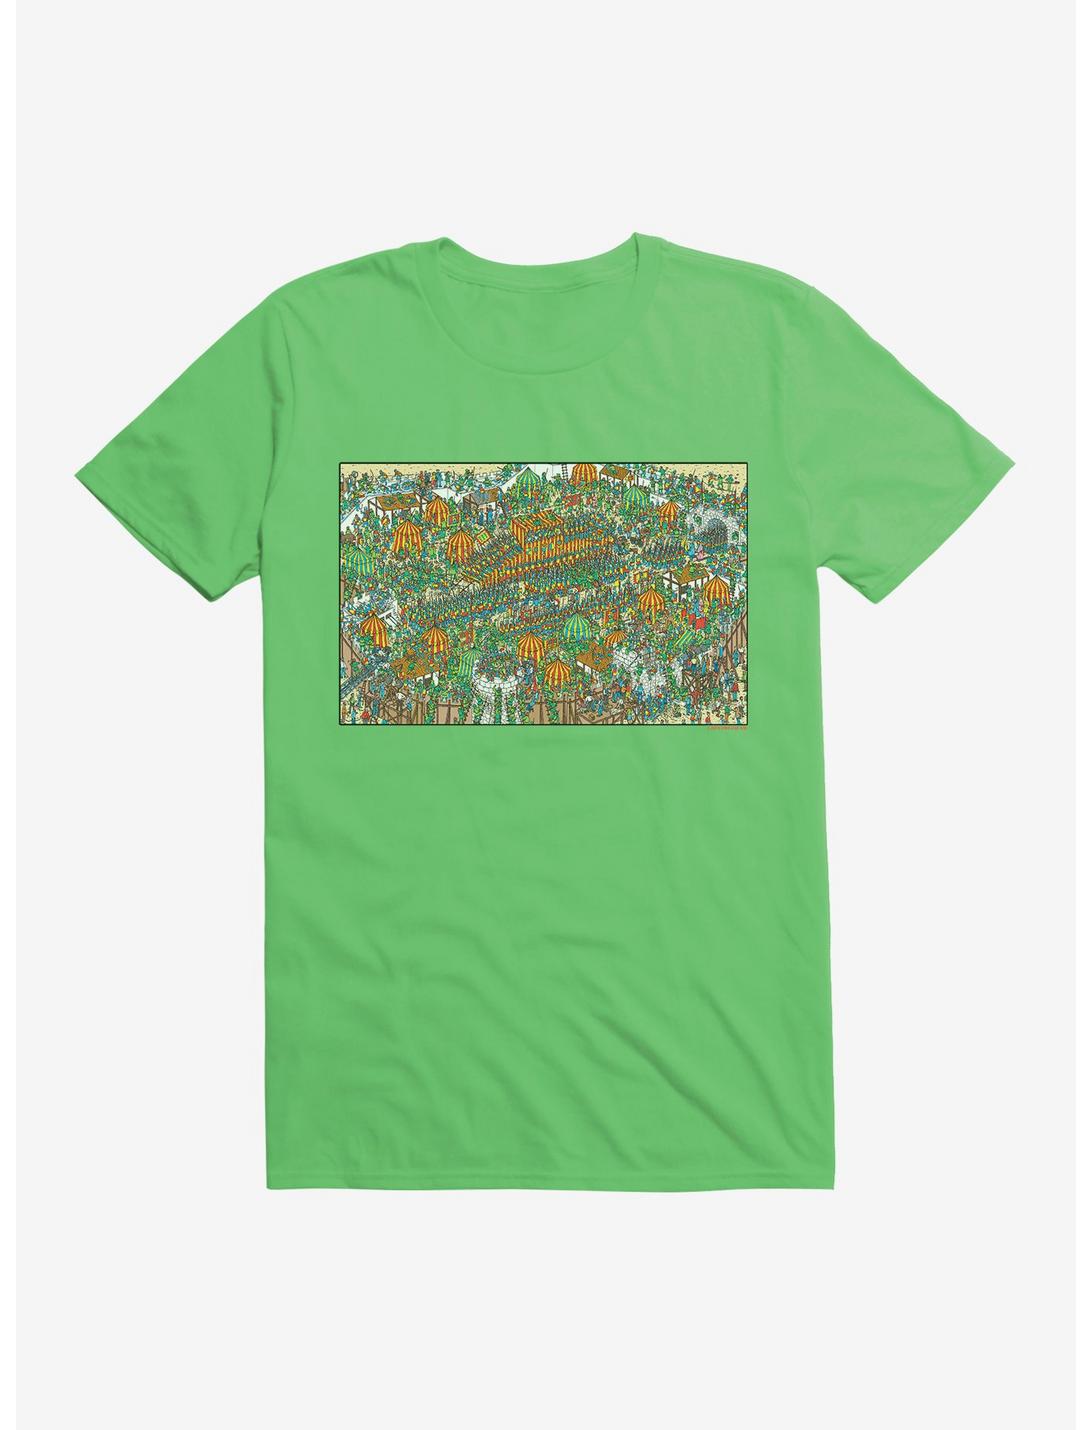 Where's Waldo? Search Sherwood Forest T-Shirt, KELLY GREEN, hi-res